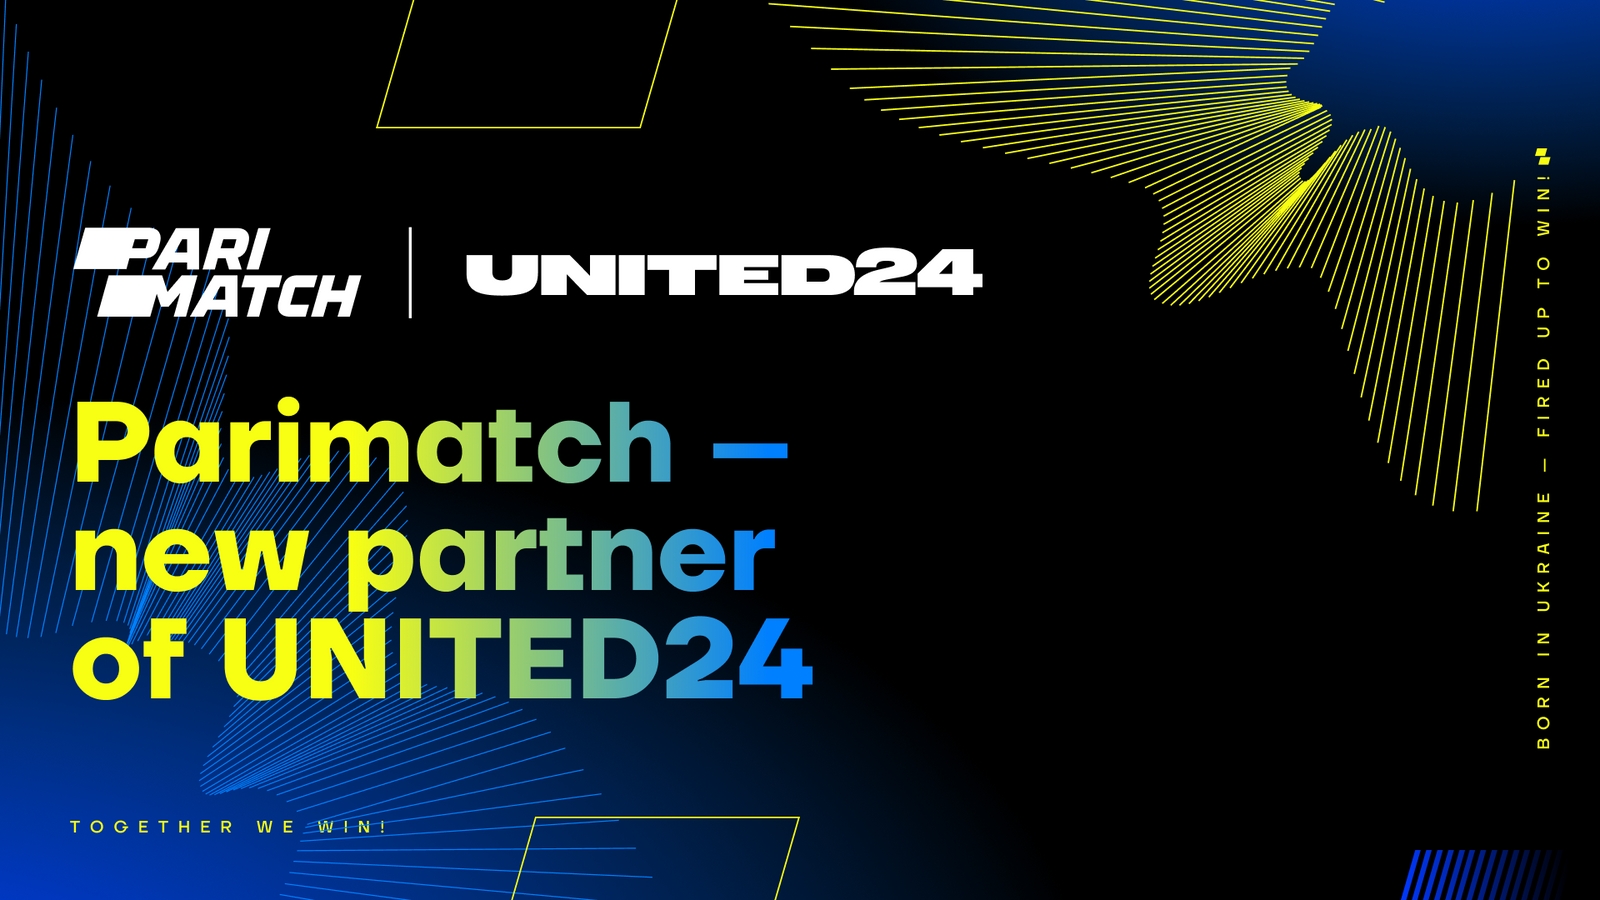 Parimatch has Become a Partner of UNITED24